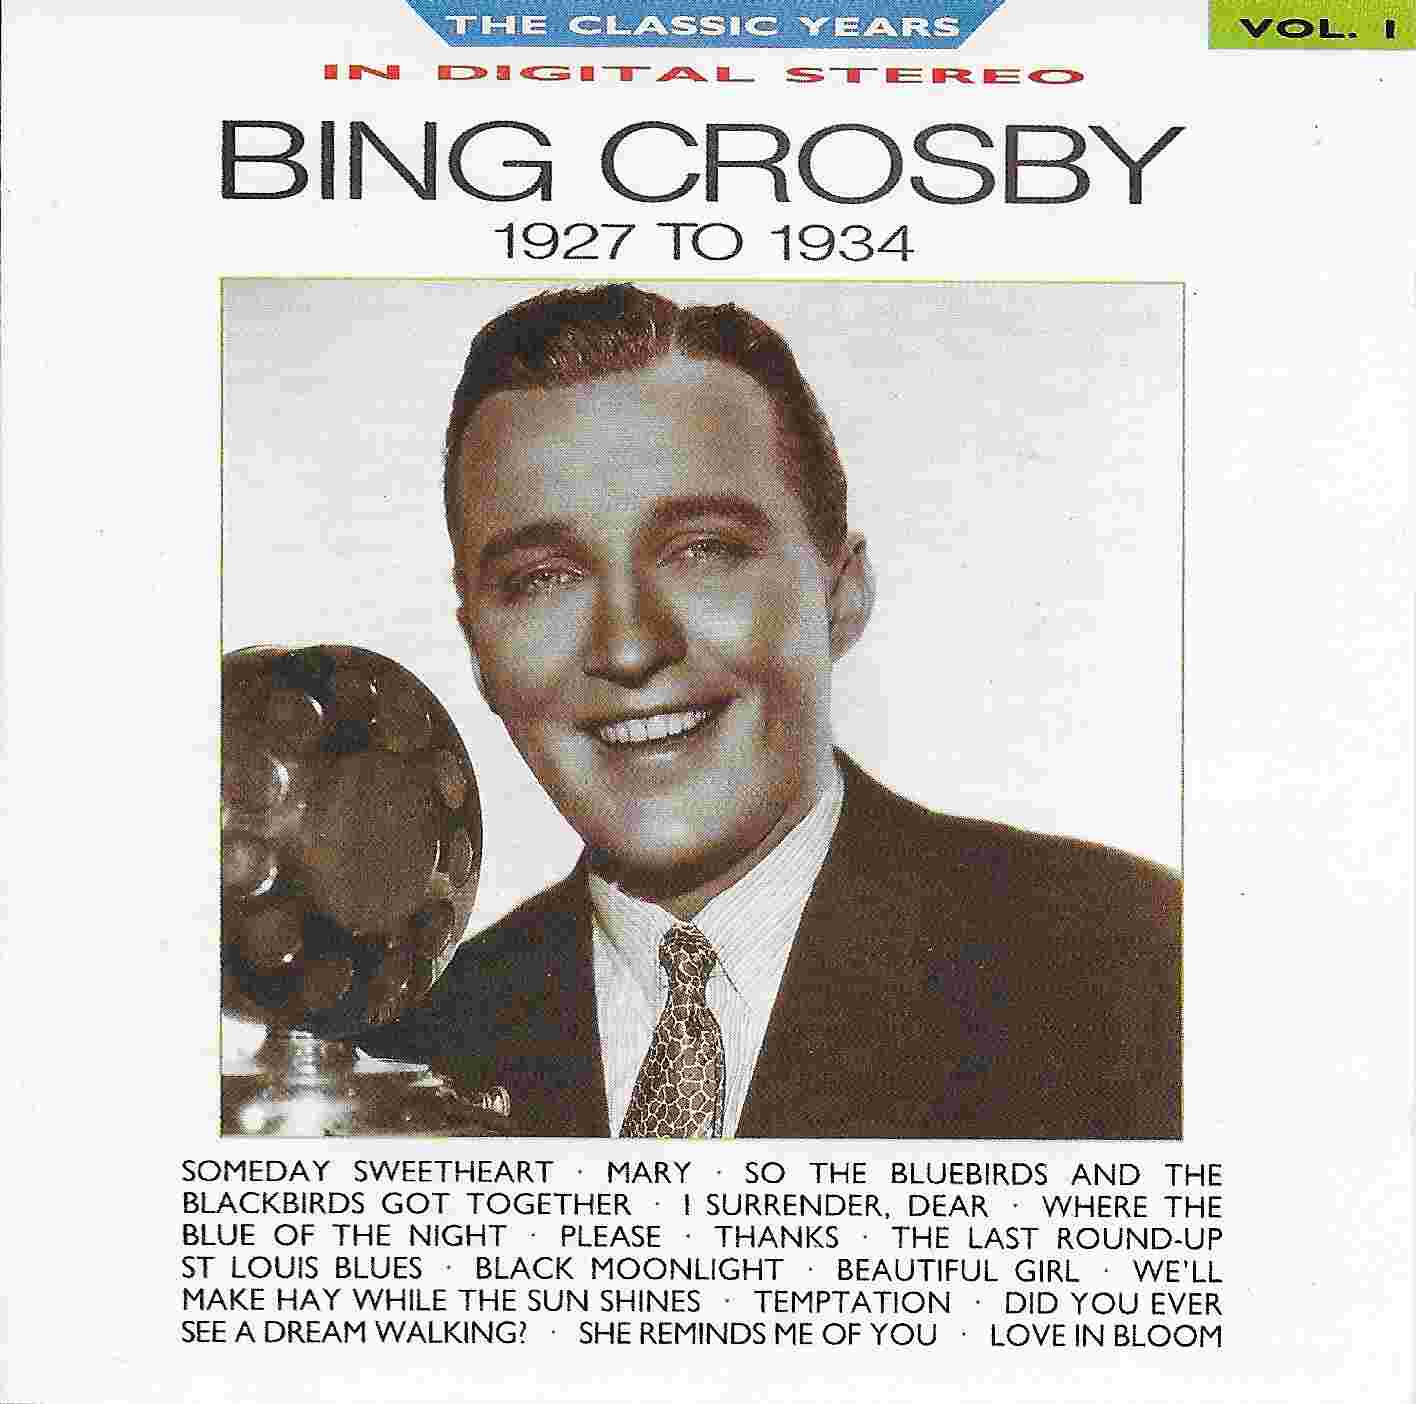 Picture of Classic years - Volume 1, Bing Crosby by artist Bing Crosby from the BBC cds - Records and Tapes library